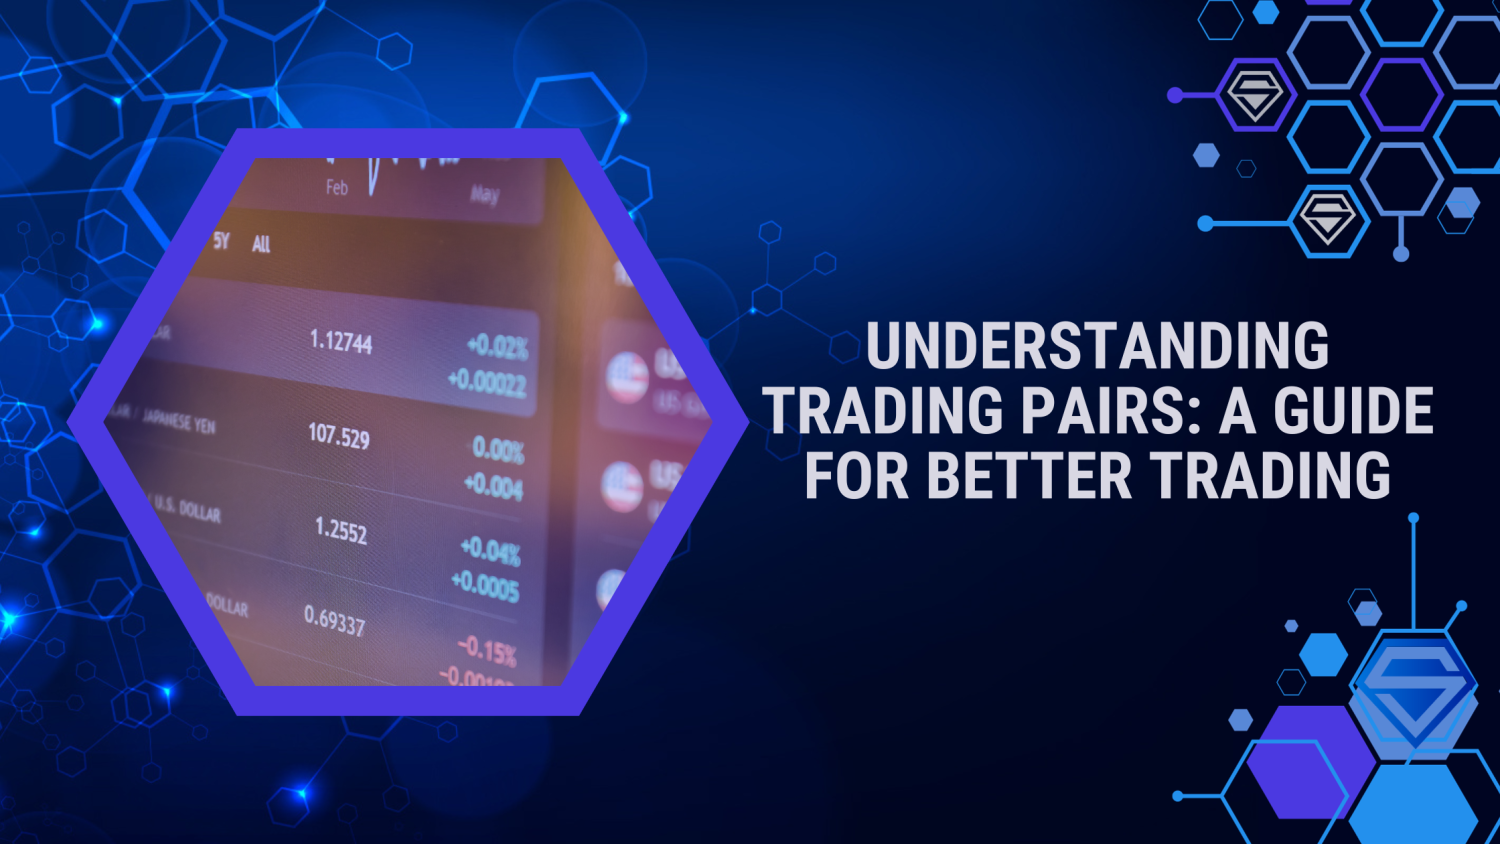 What are Trading Pairs: A Guide for Better Trading